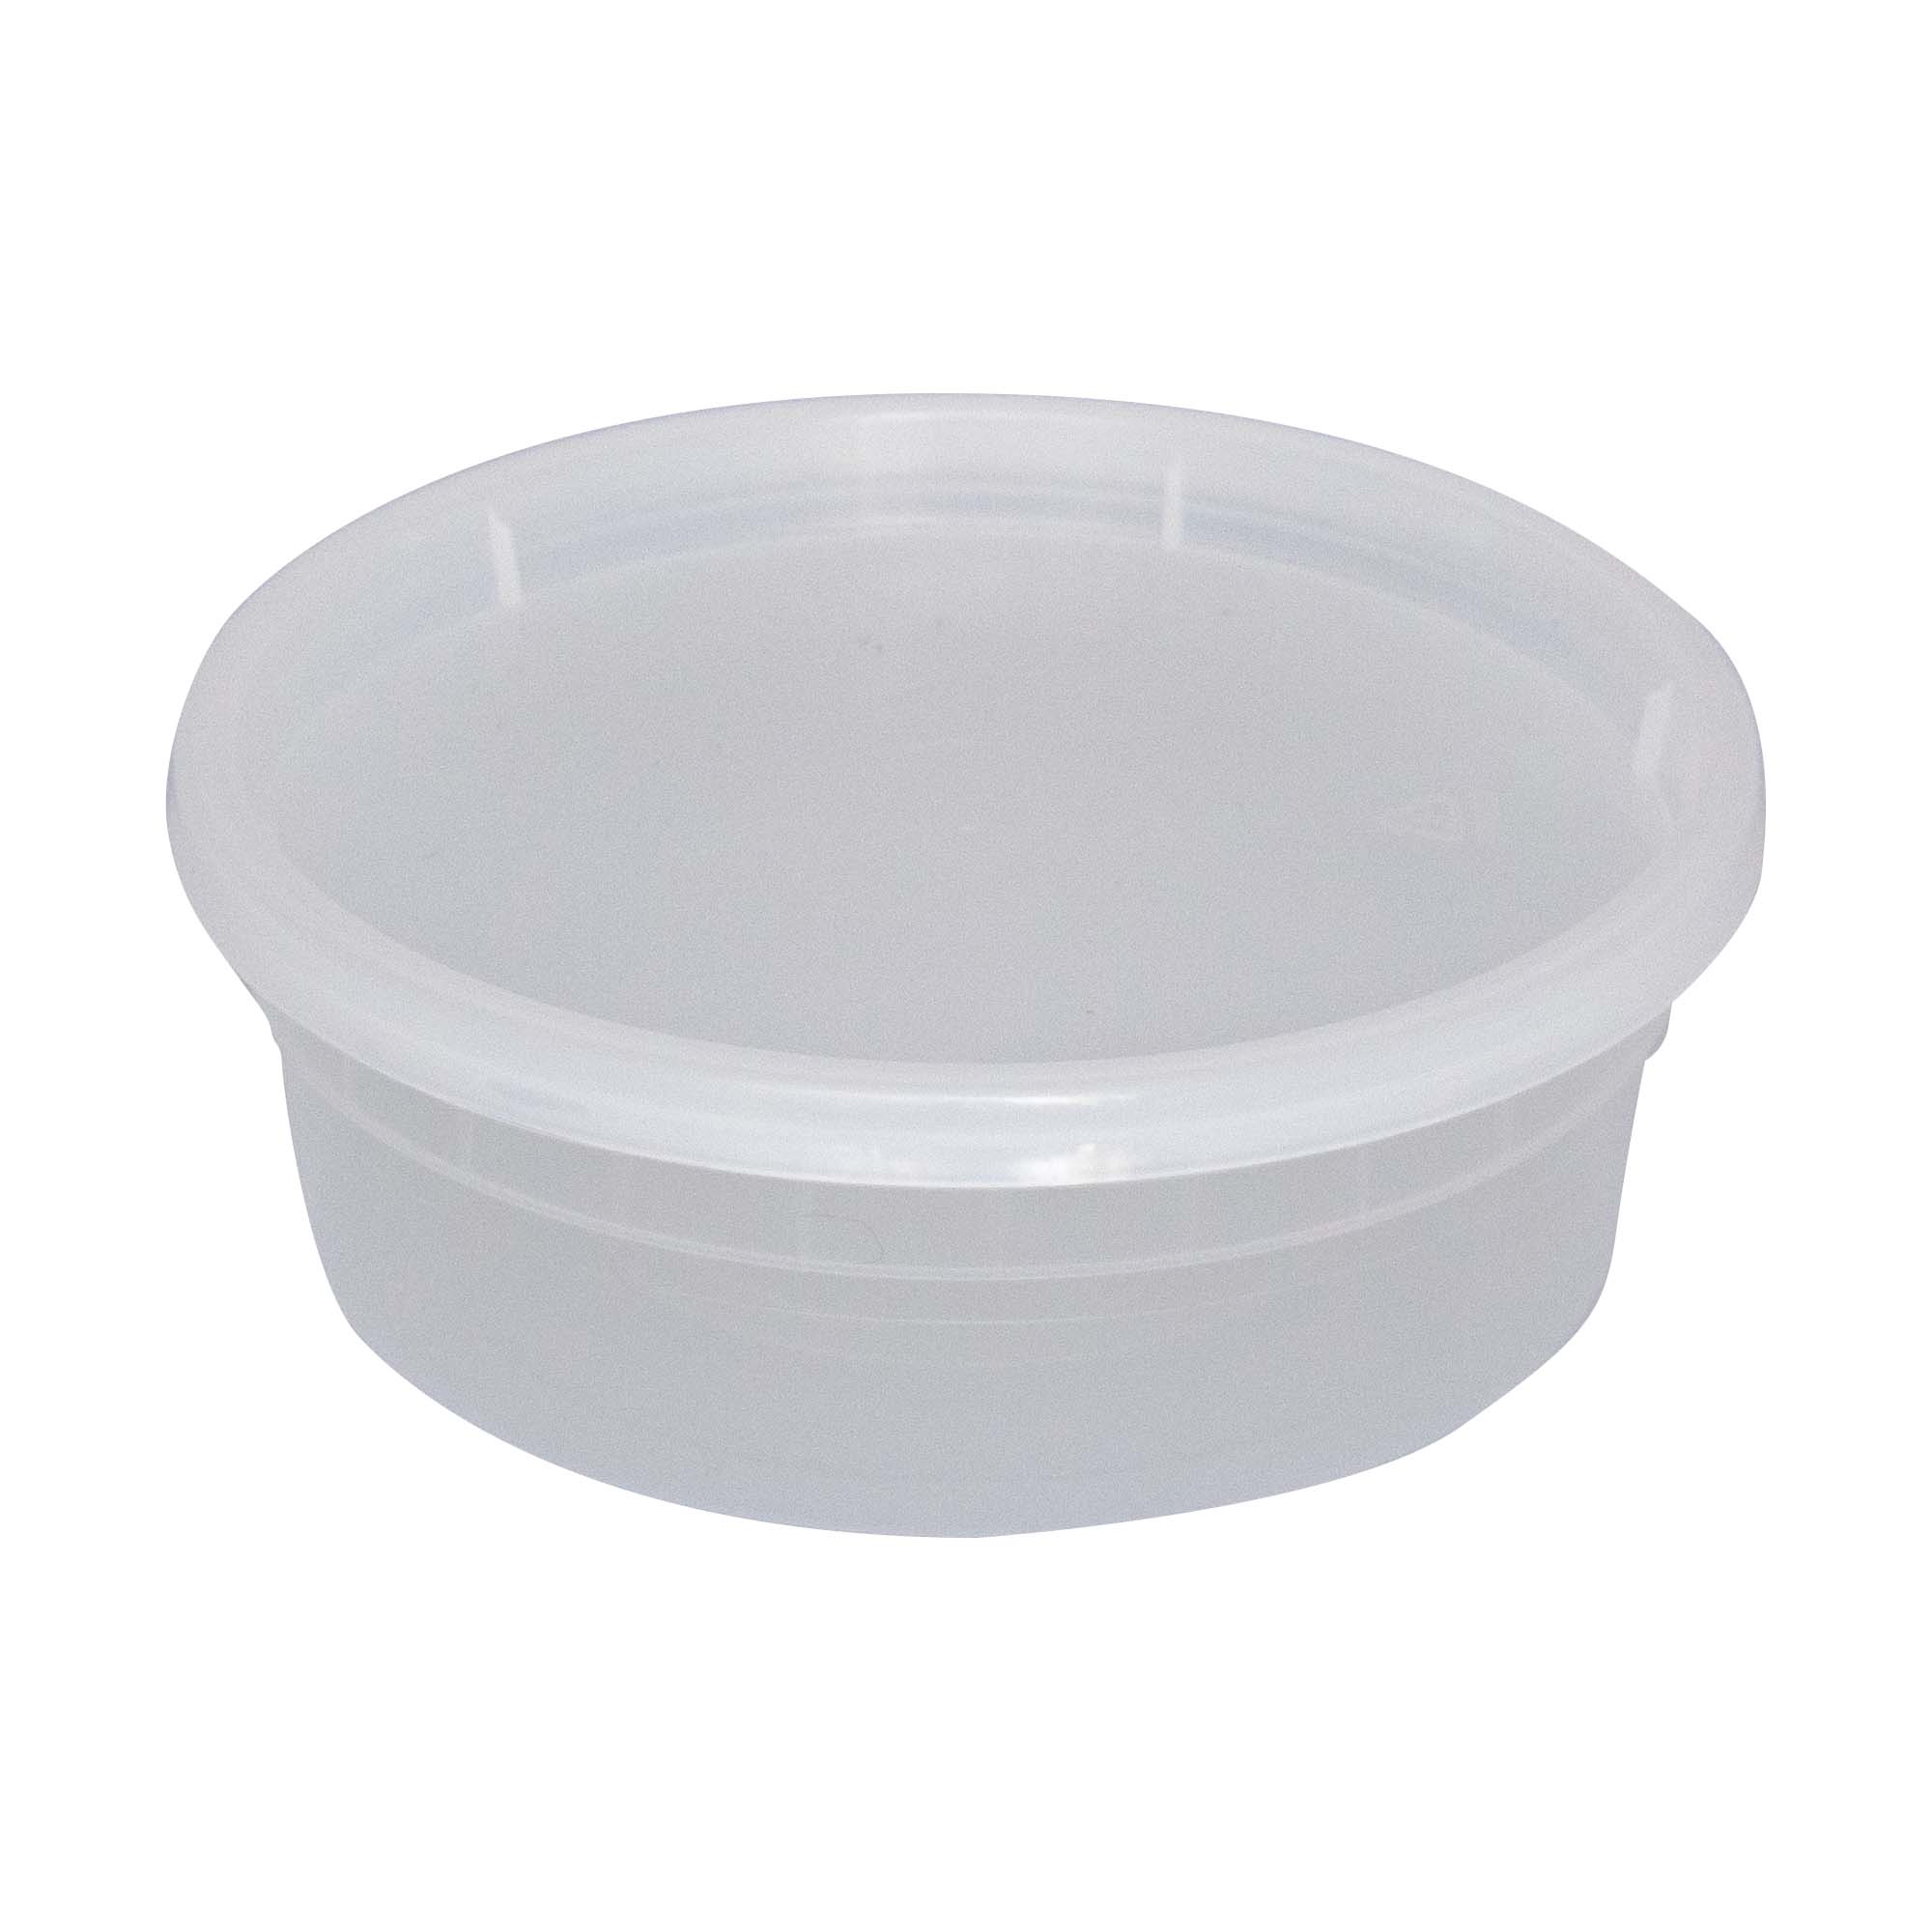 UEG Club Food Storage Containers Plastic Soup Deli Containers with Lids (16oz, 48 Count), Clear